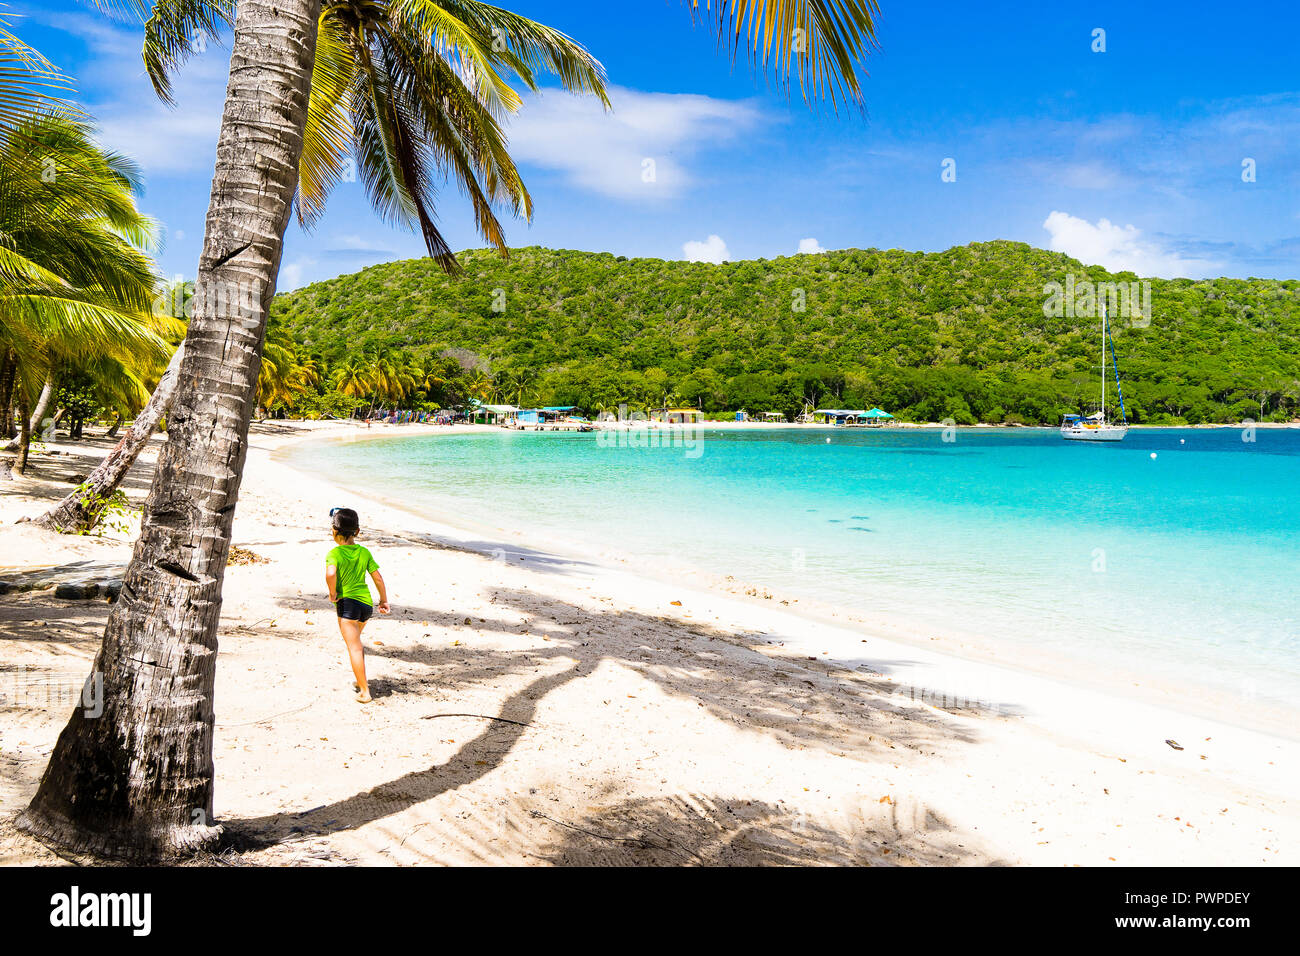 A boy 6 years old walking on the Salt Whistle Bay's beach, Mayreau, Saint-Vincent and the Grenadines, West Indies Stock Photo